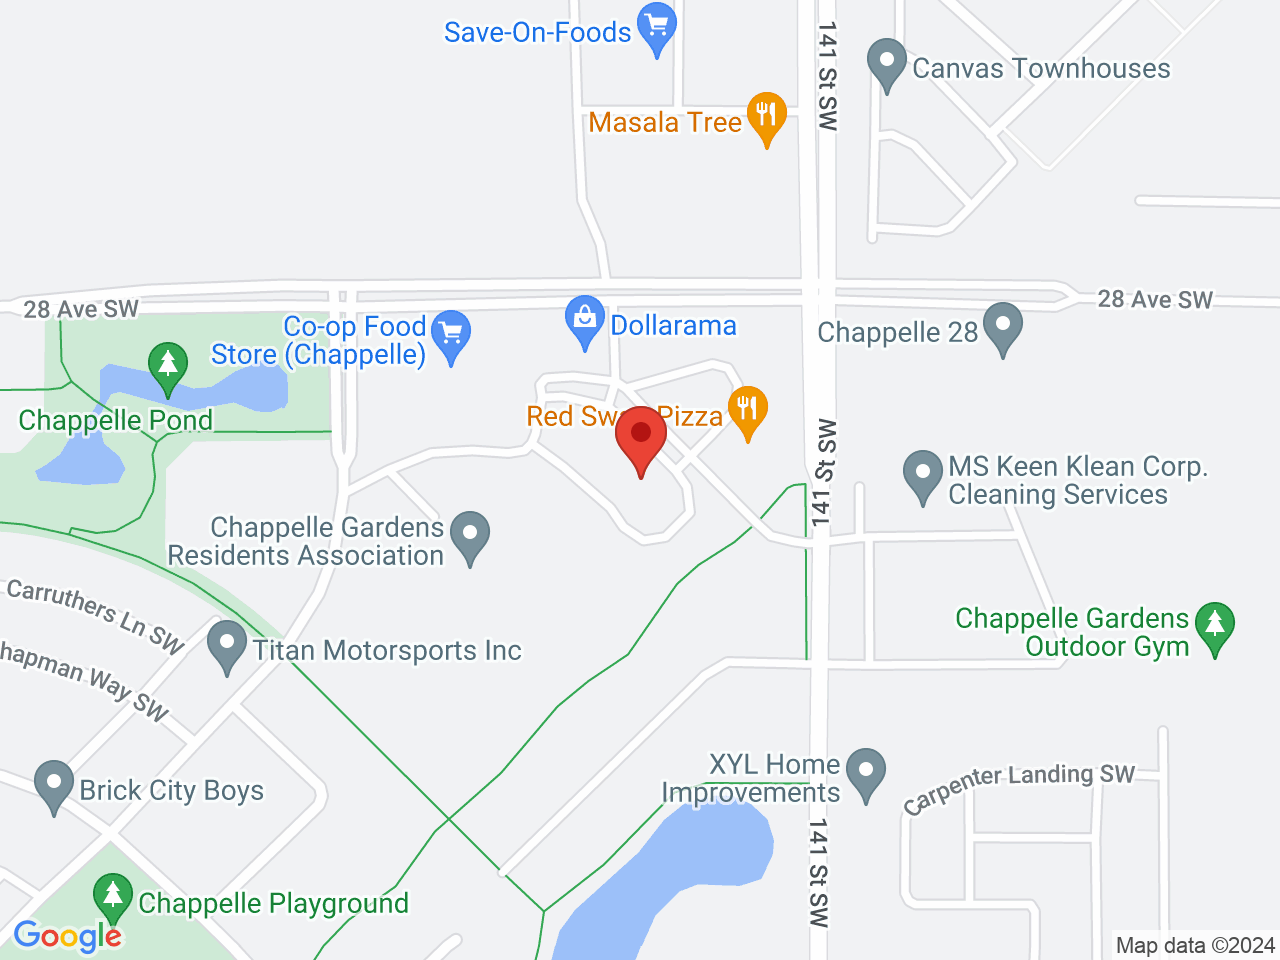 Street map for Value Buds Chapelle, 14143 28 Ave. SW, Edmonton AB